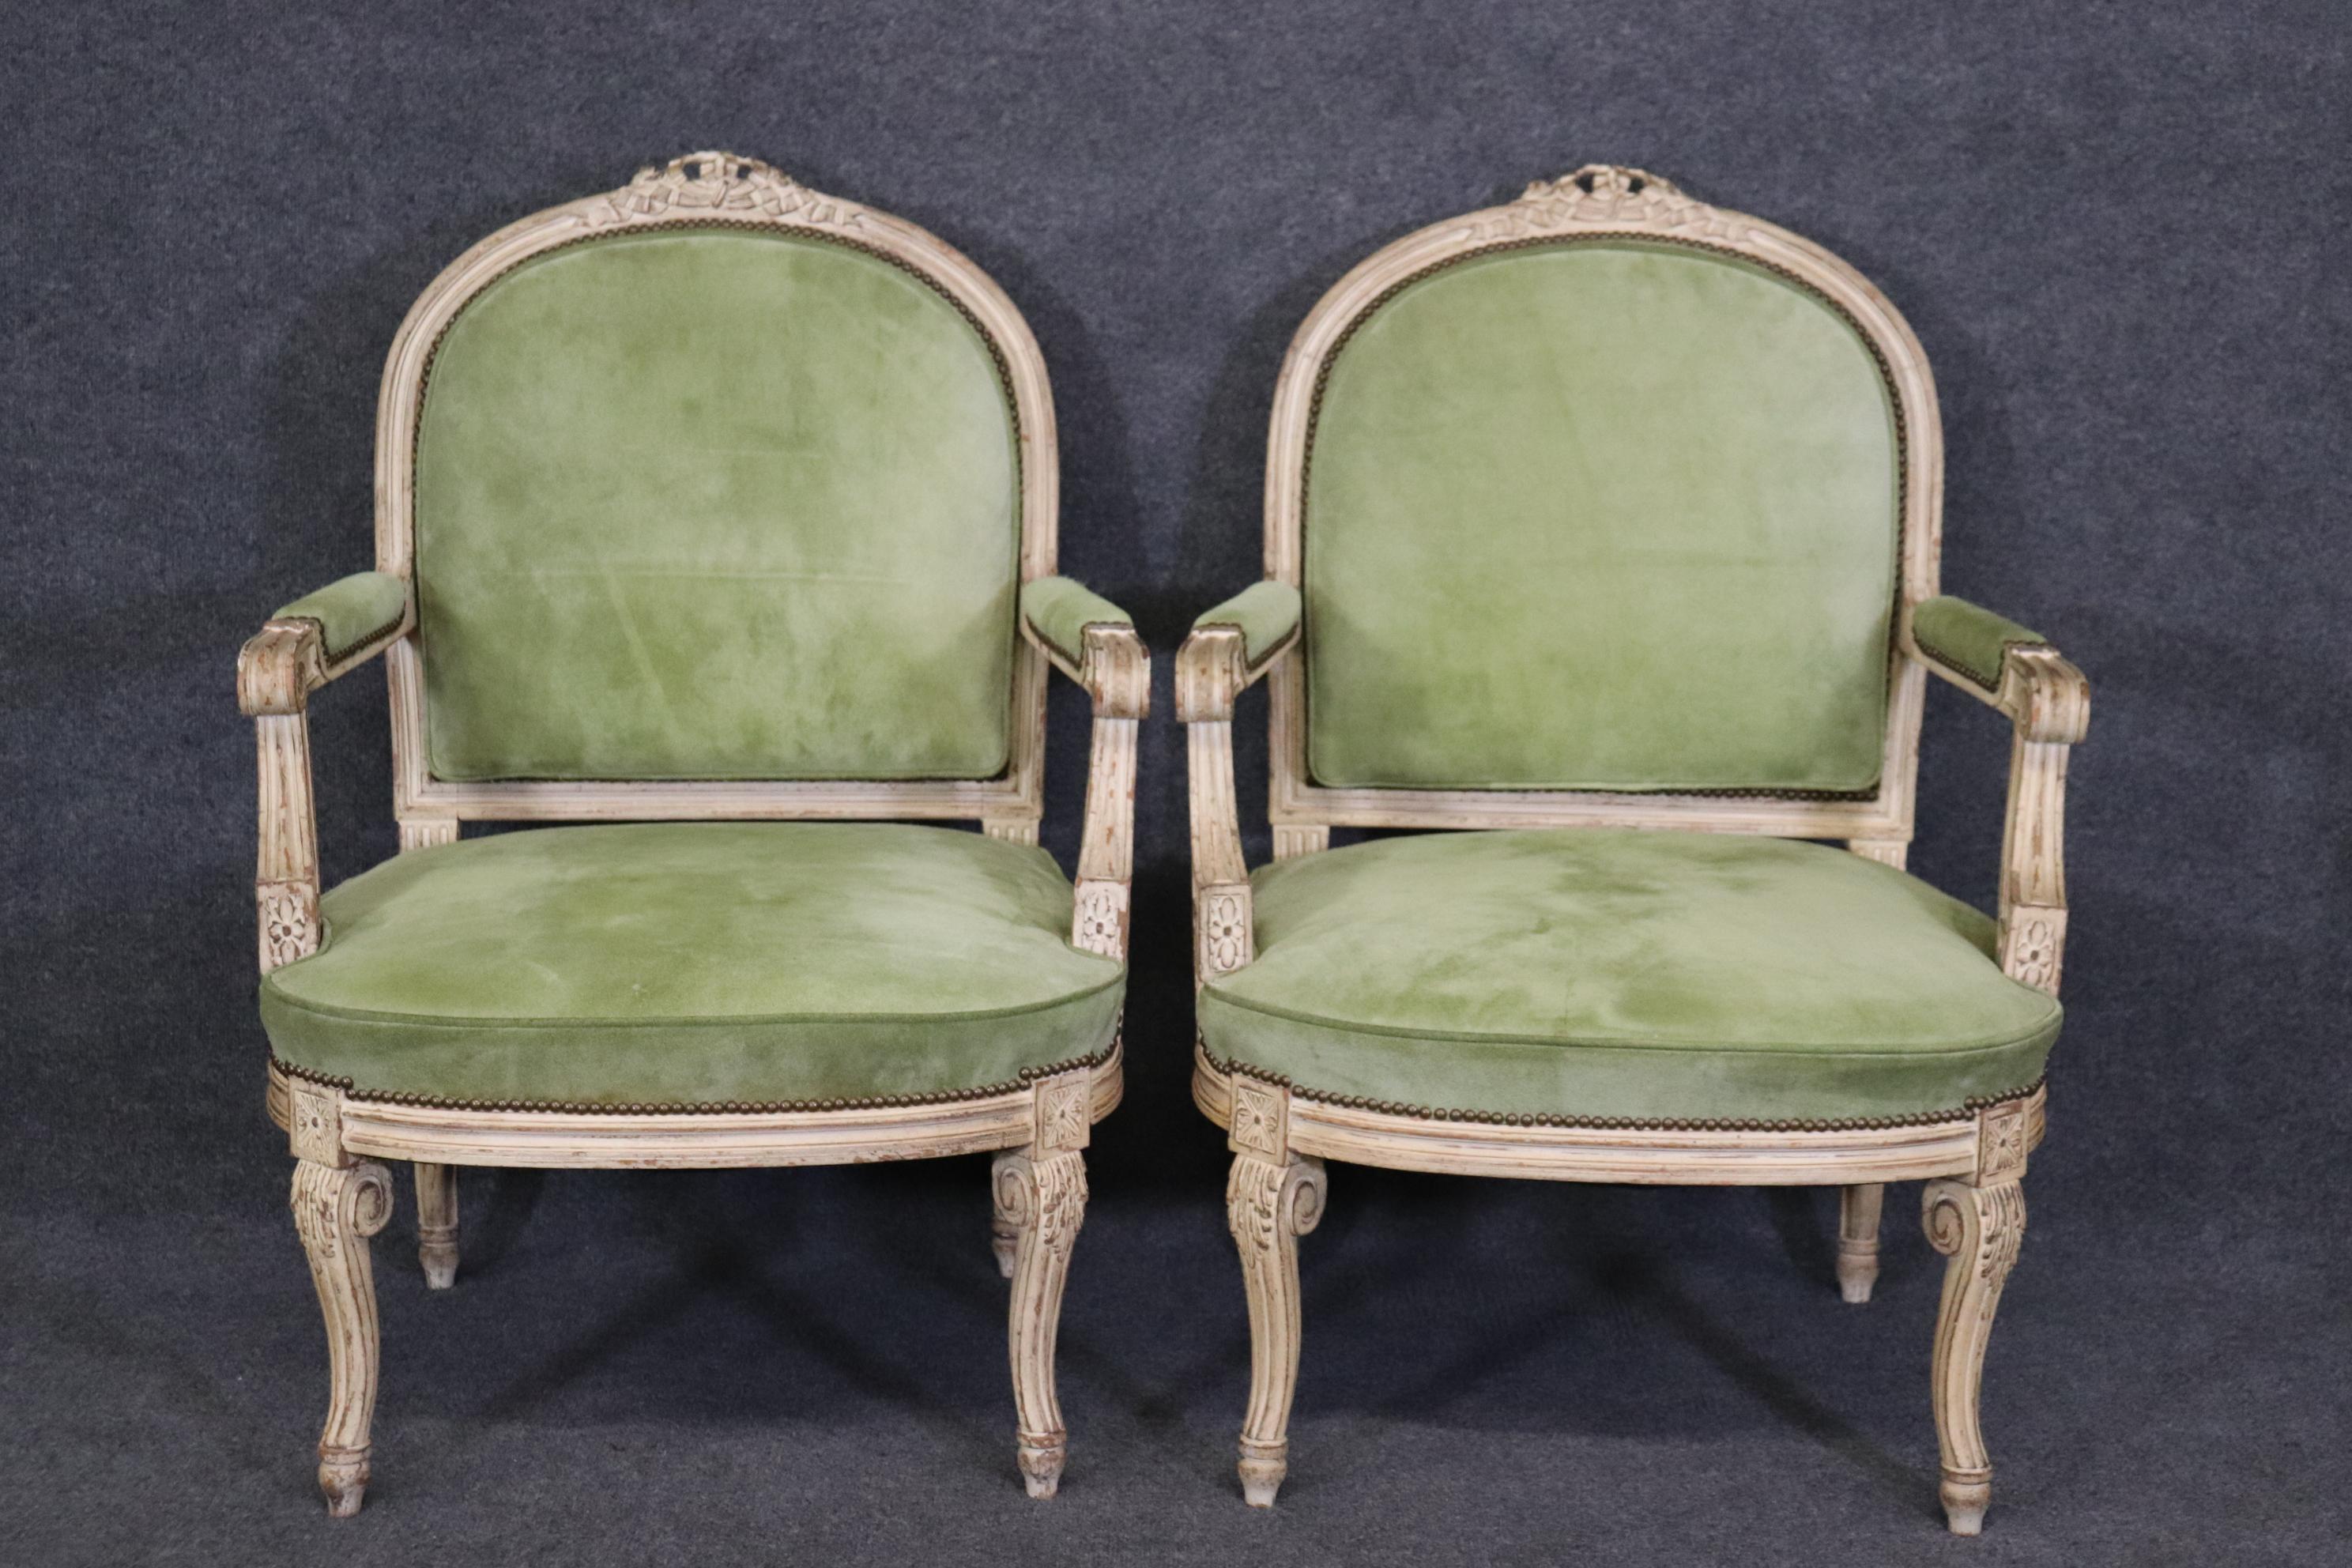 This is s a superb set of 2 ( we have an identical pair listed separately if interested) and they are upholstered in suede and in good condition with minor stains and signs of age as to be expected. The chairs date to teh 1940s and measure 38.75